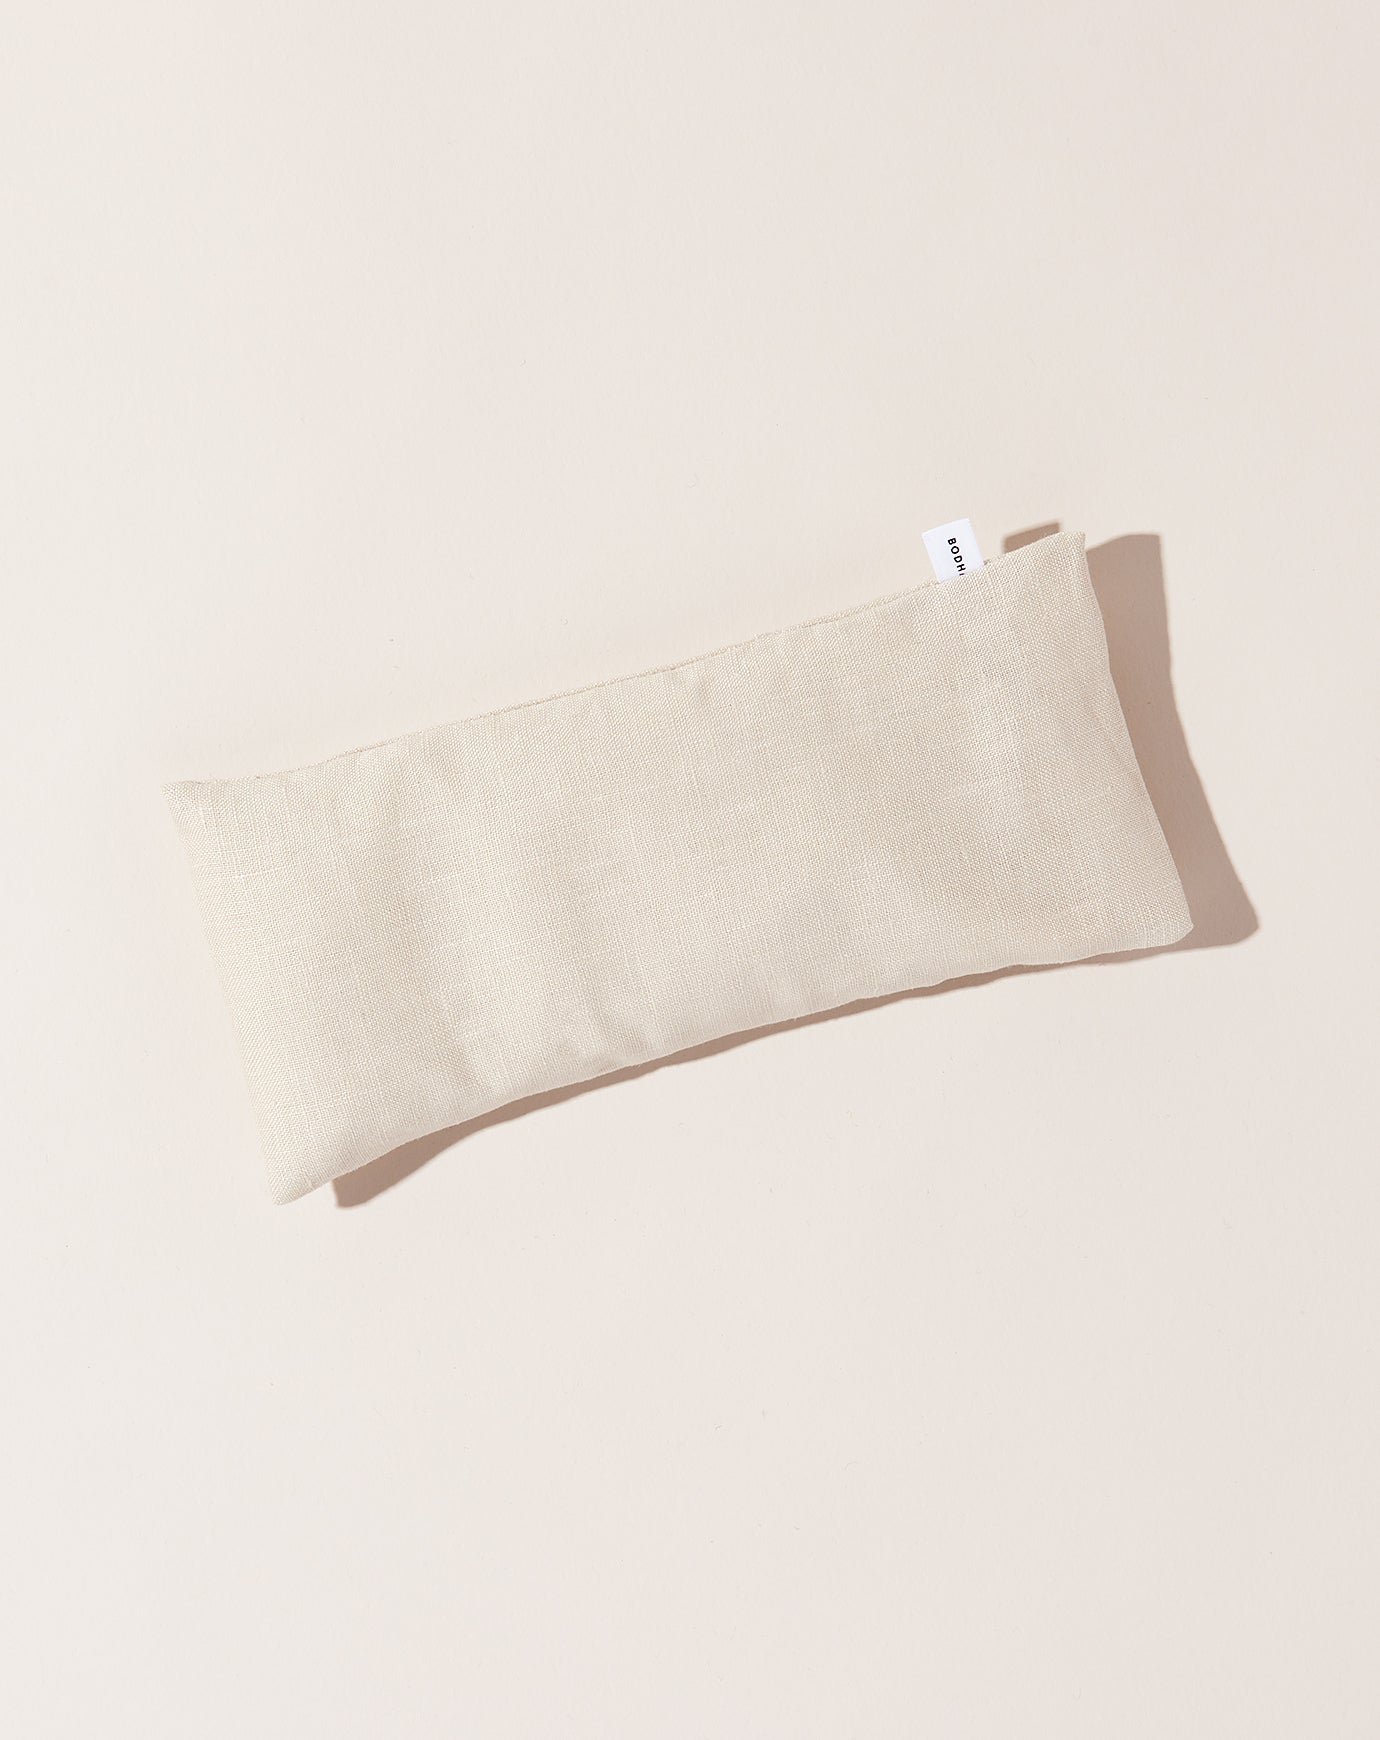 Linen Aromatherapy Eye Pillow in Natural